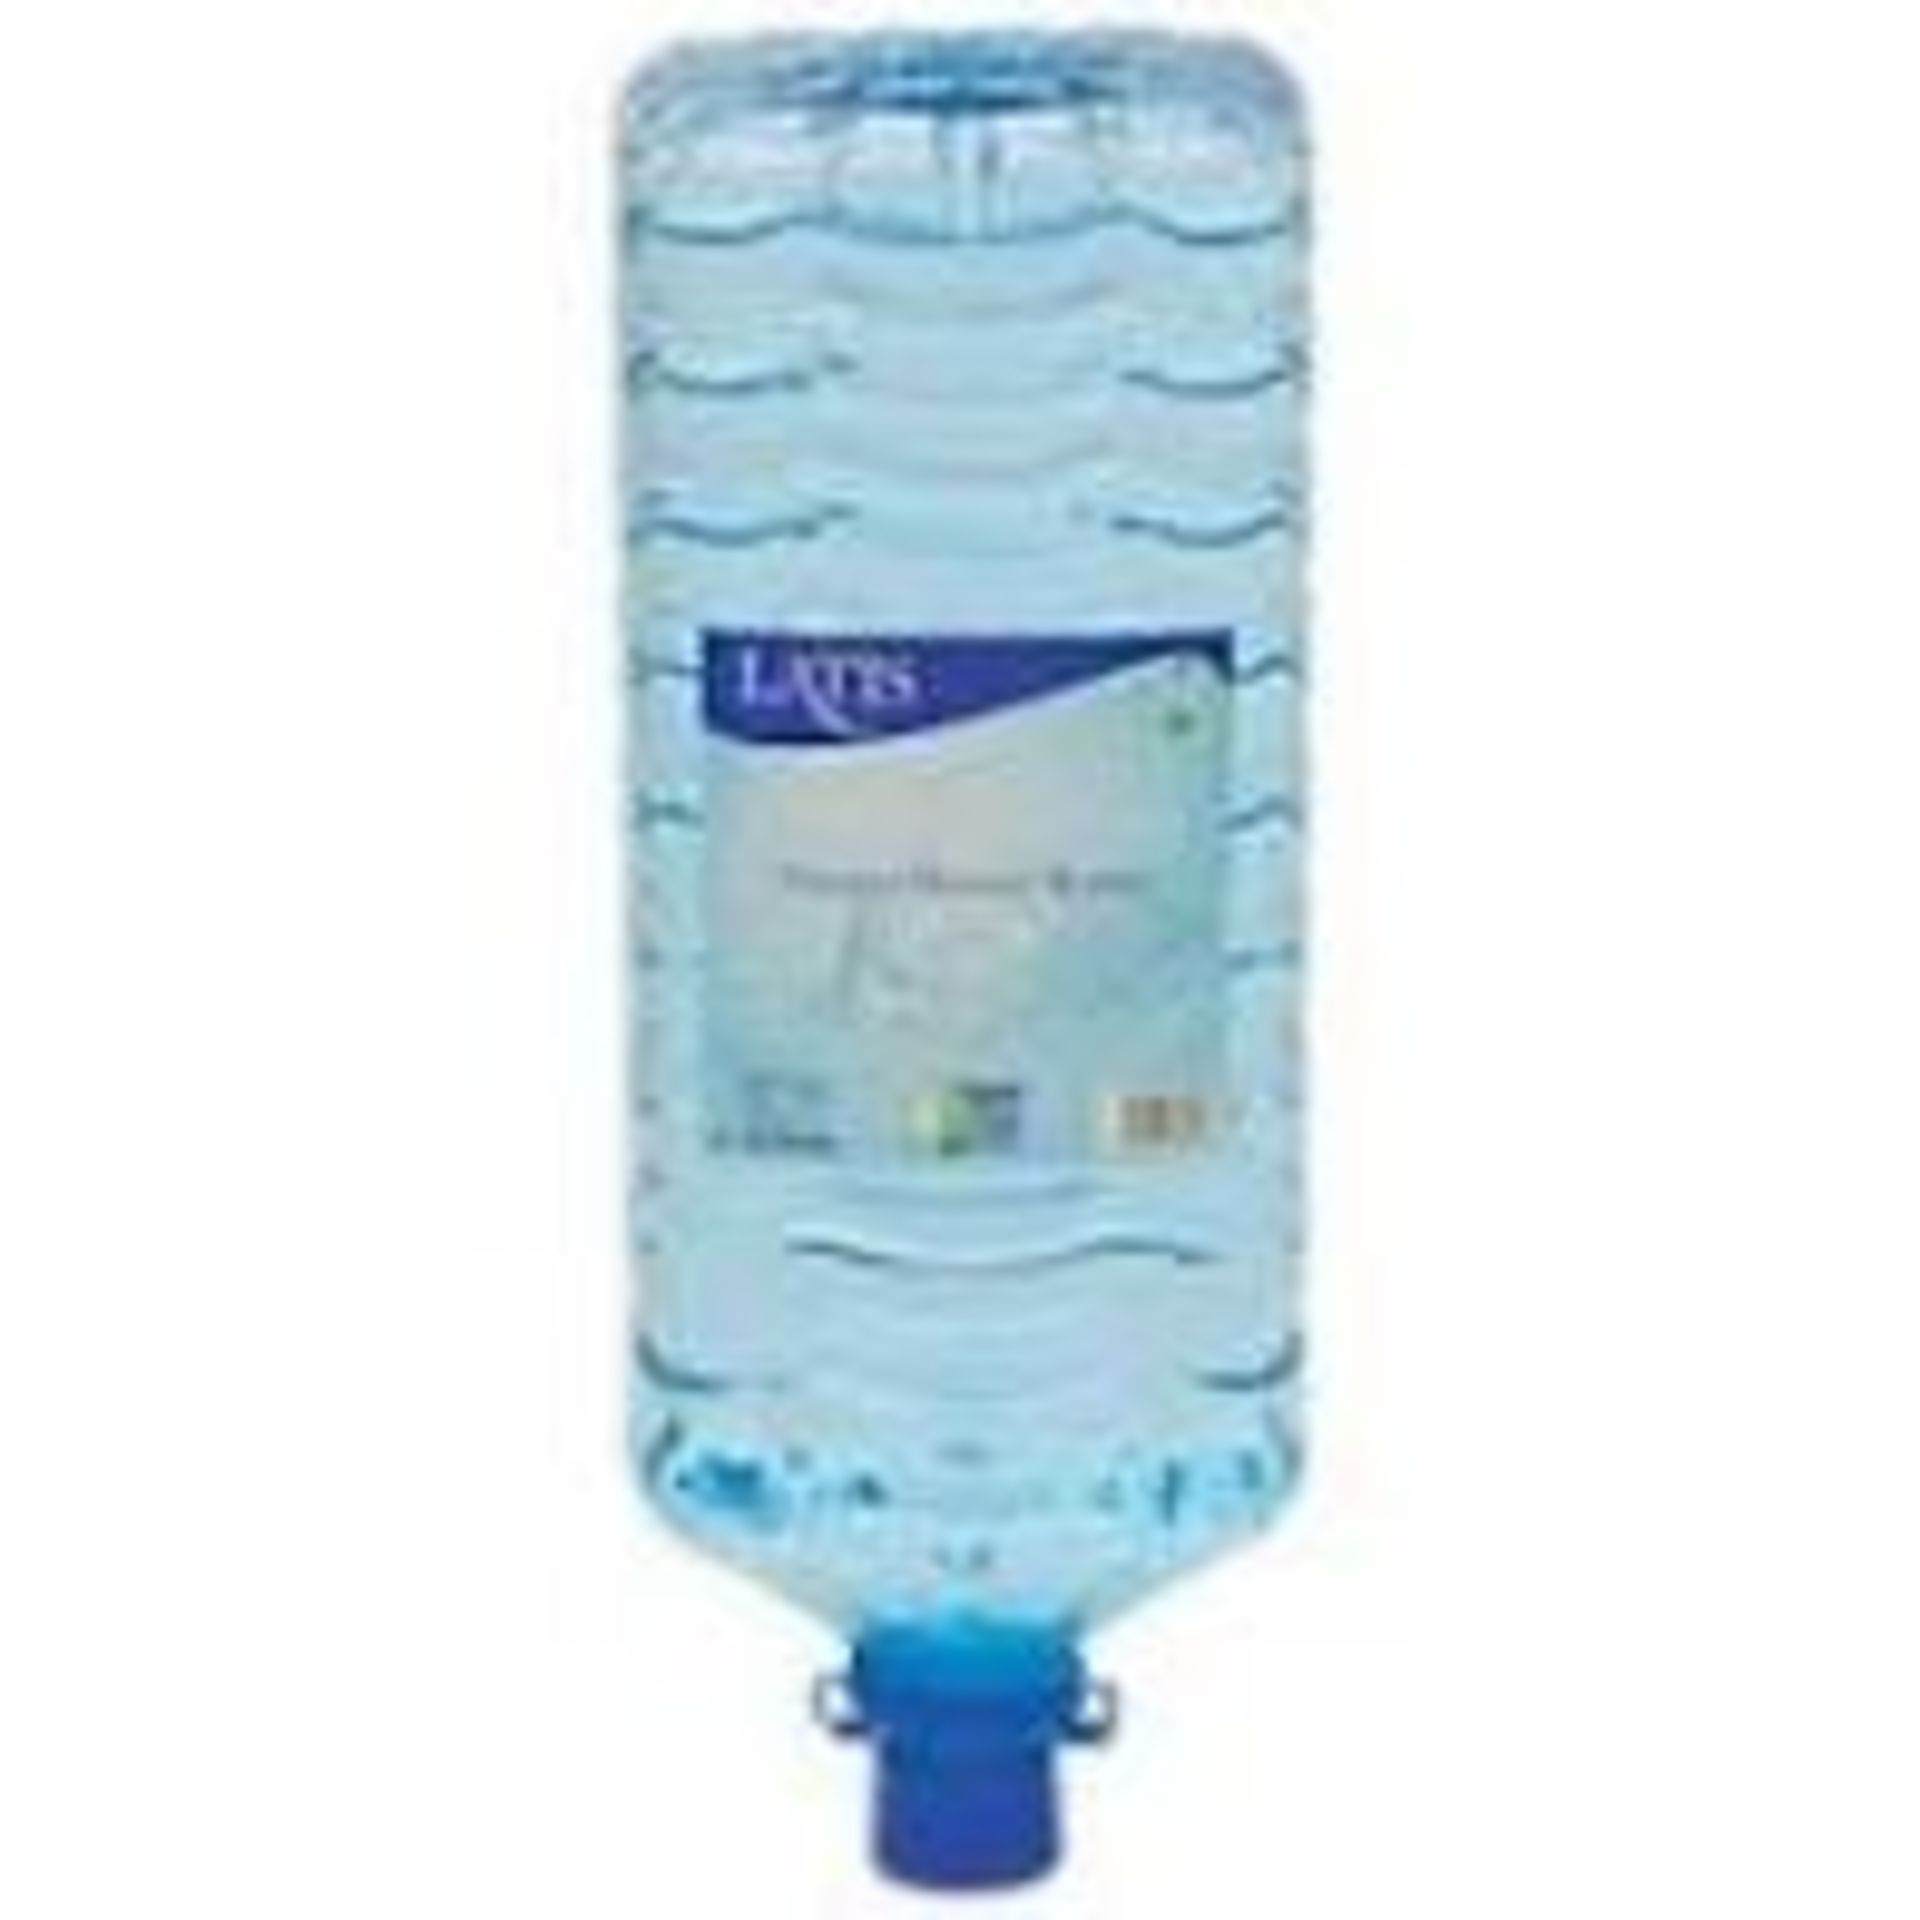 1 LATIS NATURAL MINERAL WATER 15 LITRE BOTTLE / RRP £23.39 (VIEWING HIGHLY RECOMMENDED)